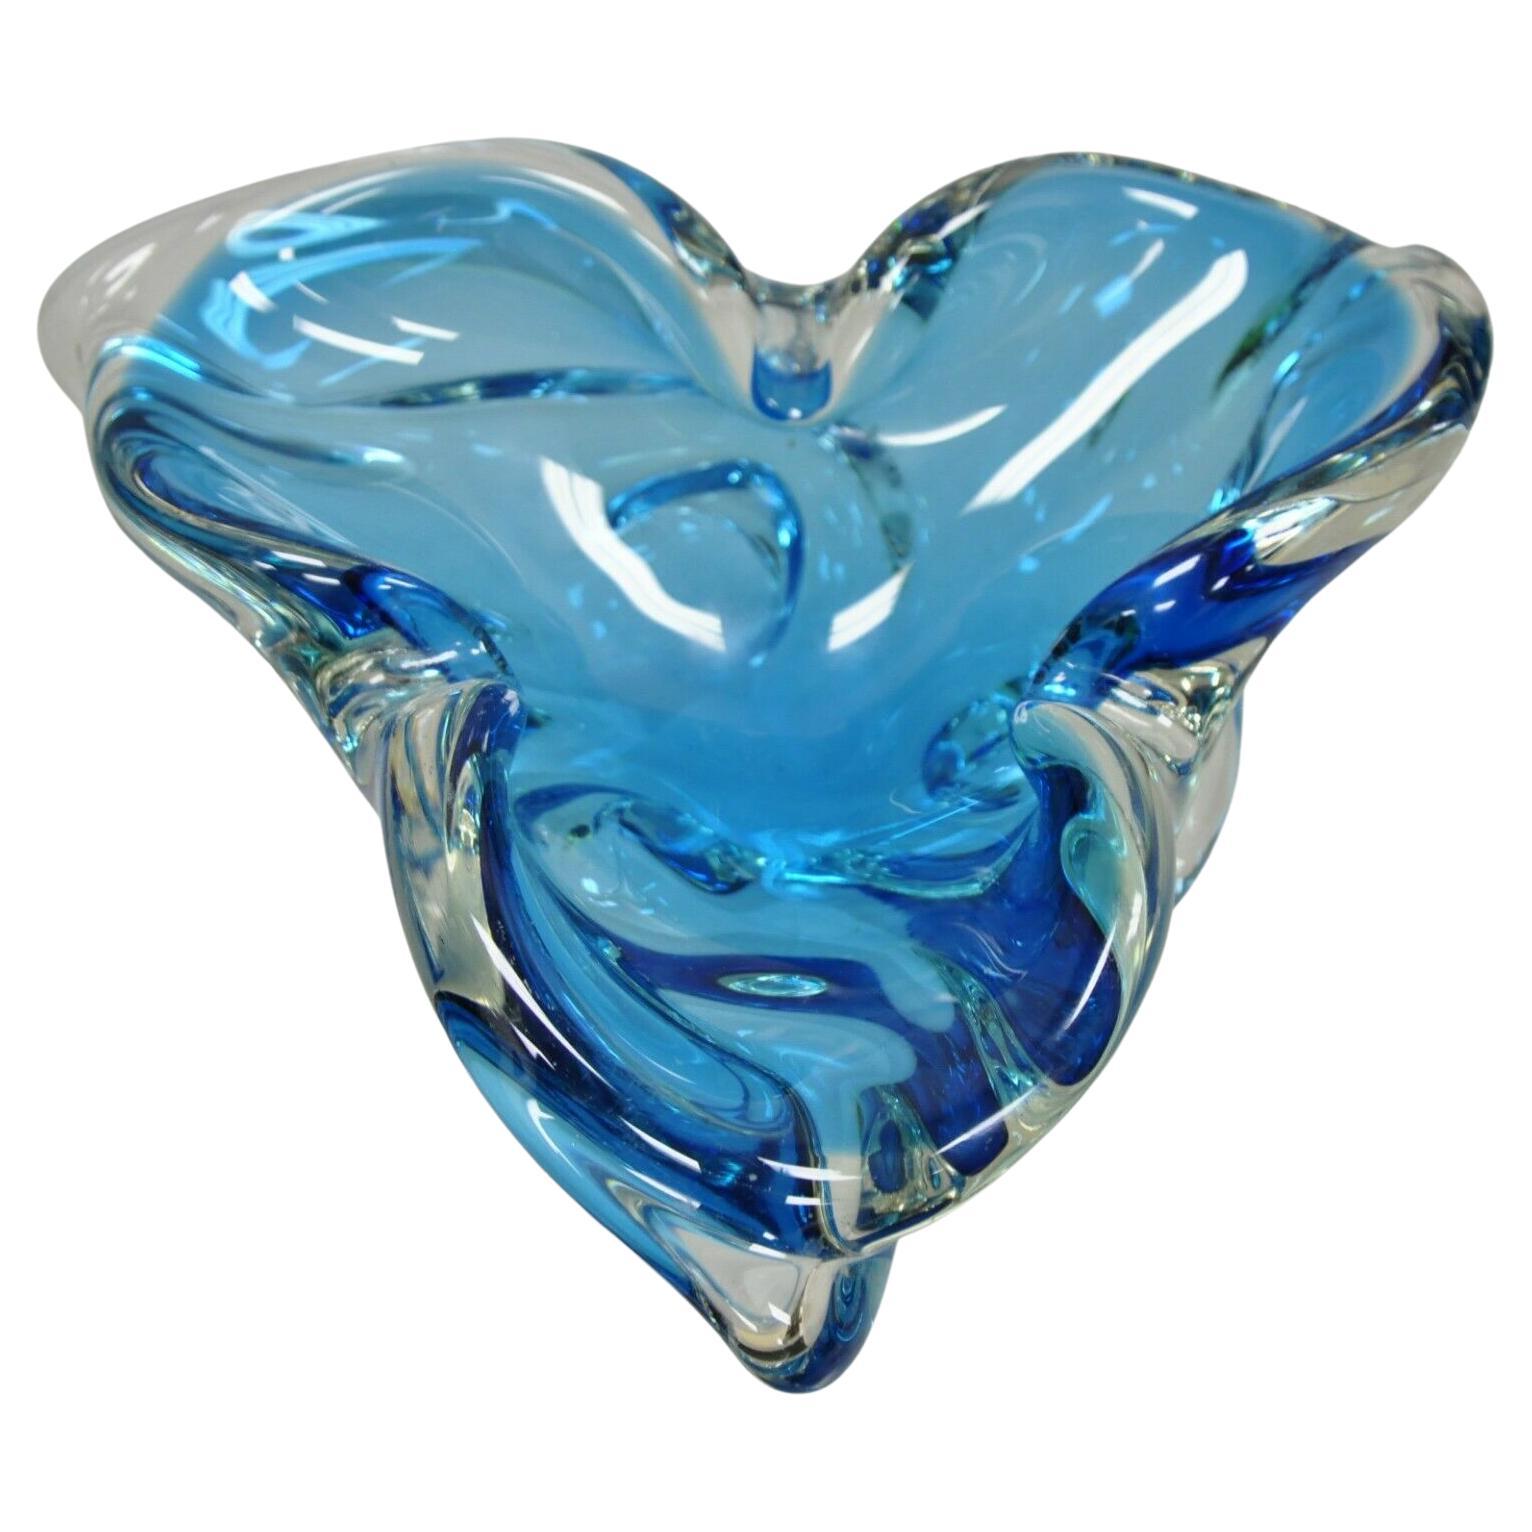 Vintage Mid-Century Modern Blue Blown Glass Trefoil Murano Style Bowl Dish For Sale